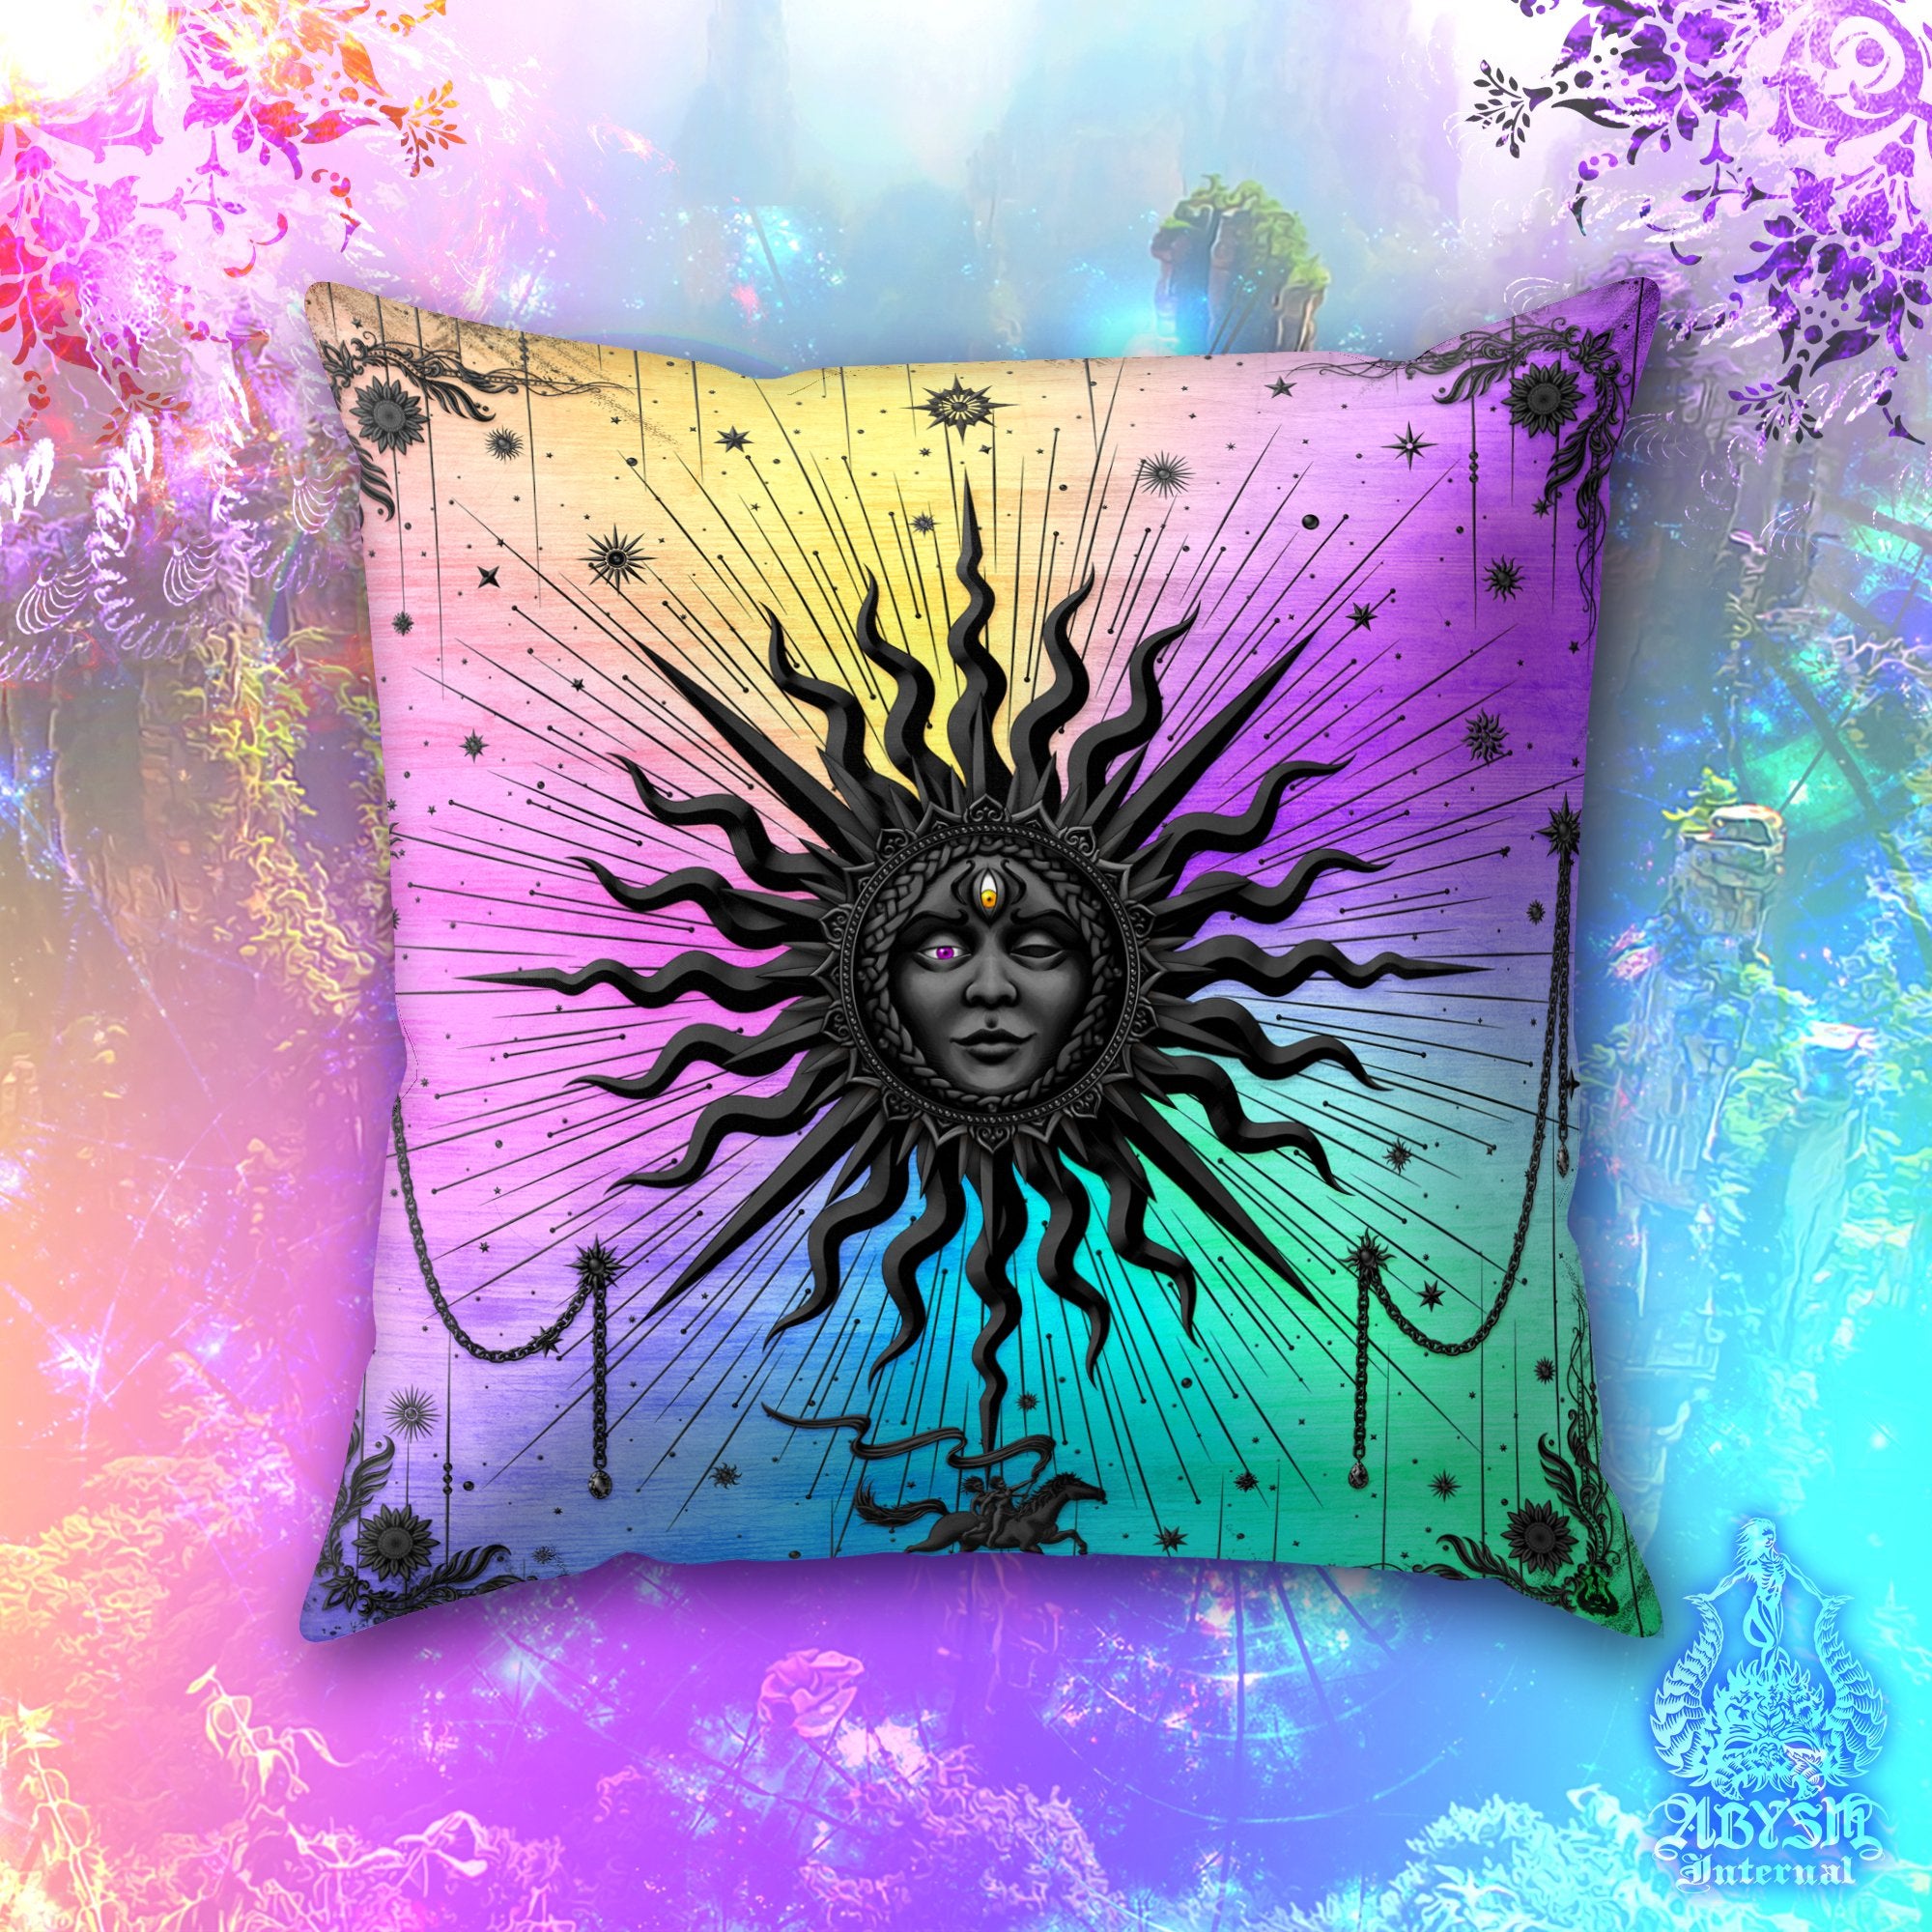 Psychedelic Throw Pillow, Trippy Decorative Accent Pillow, Indie Square Cushion Cover, Arcana Sun Tarot Art, Boho Home, Magic & Fortune Room Decor - Pastel Black - Abysm Internal